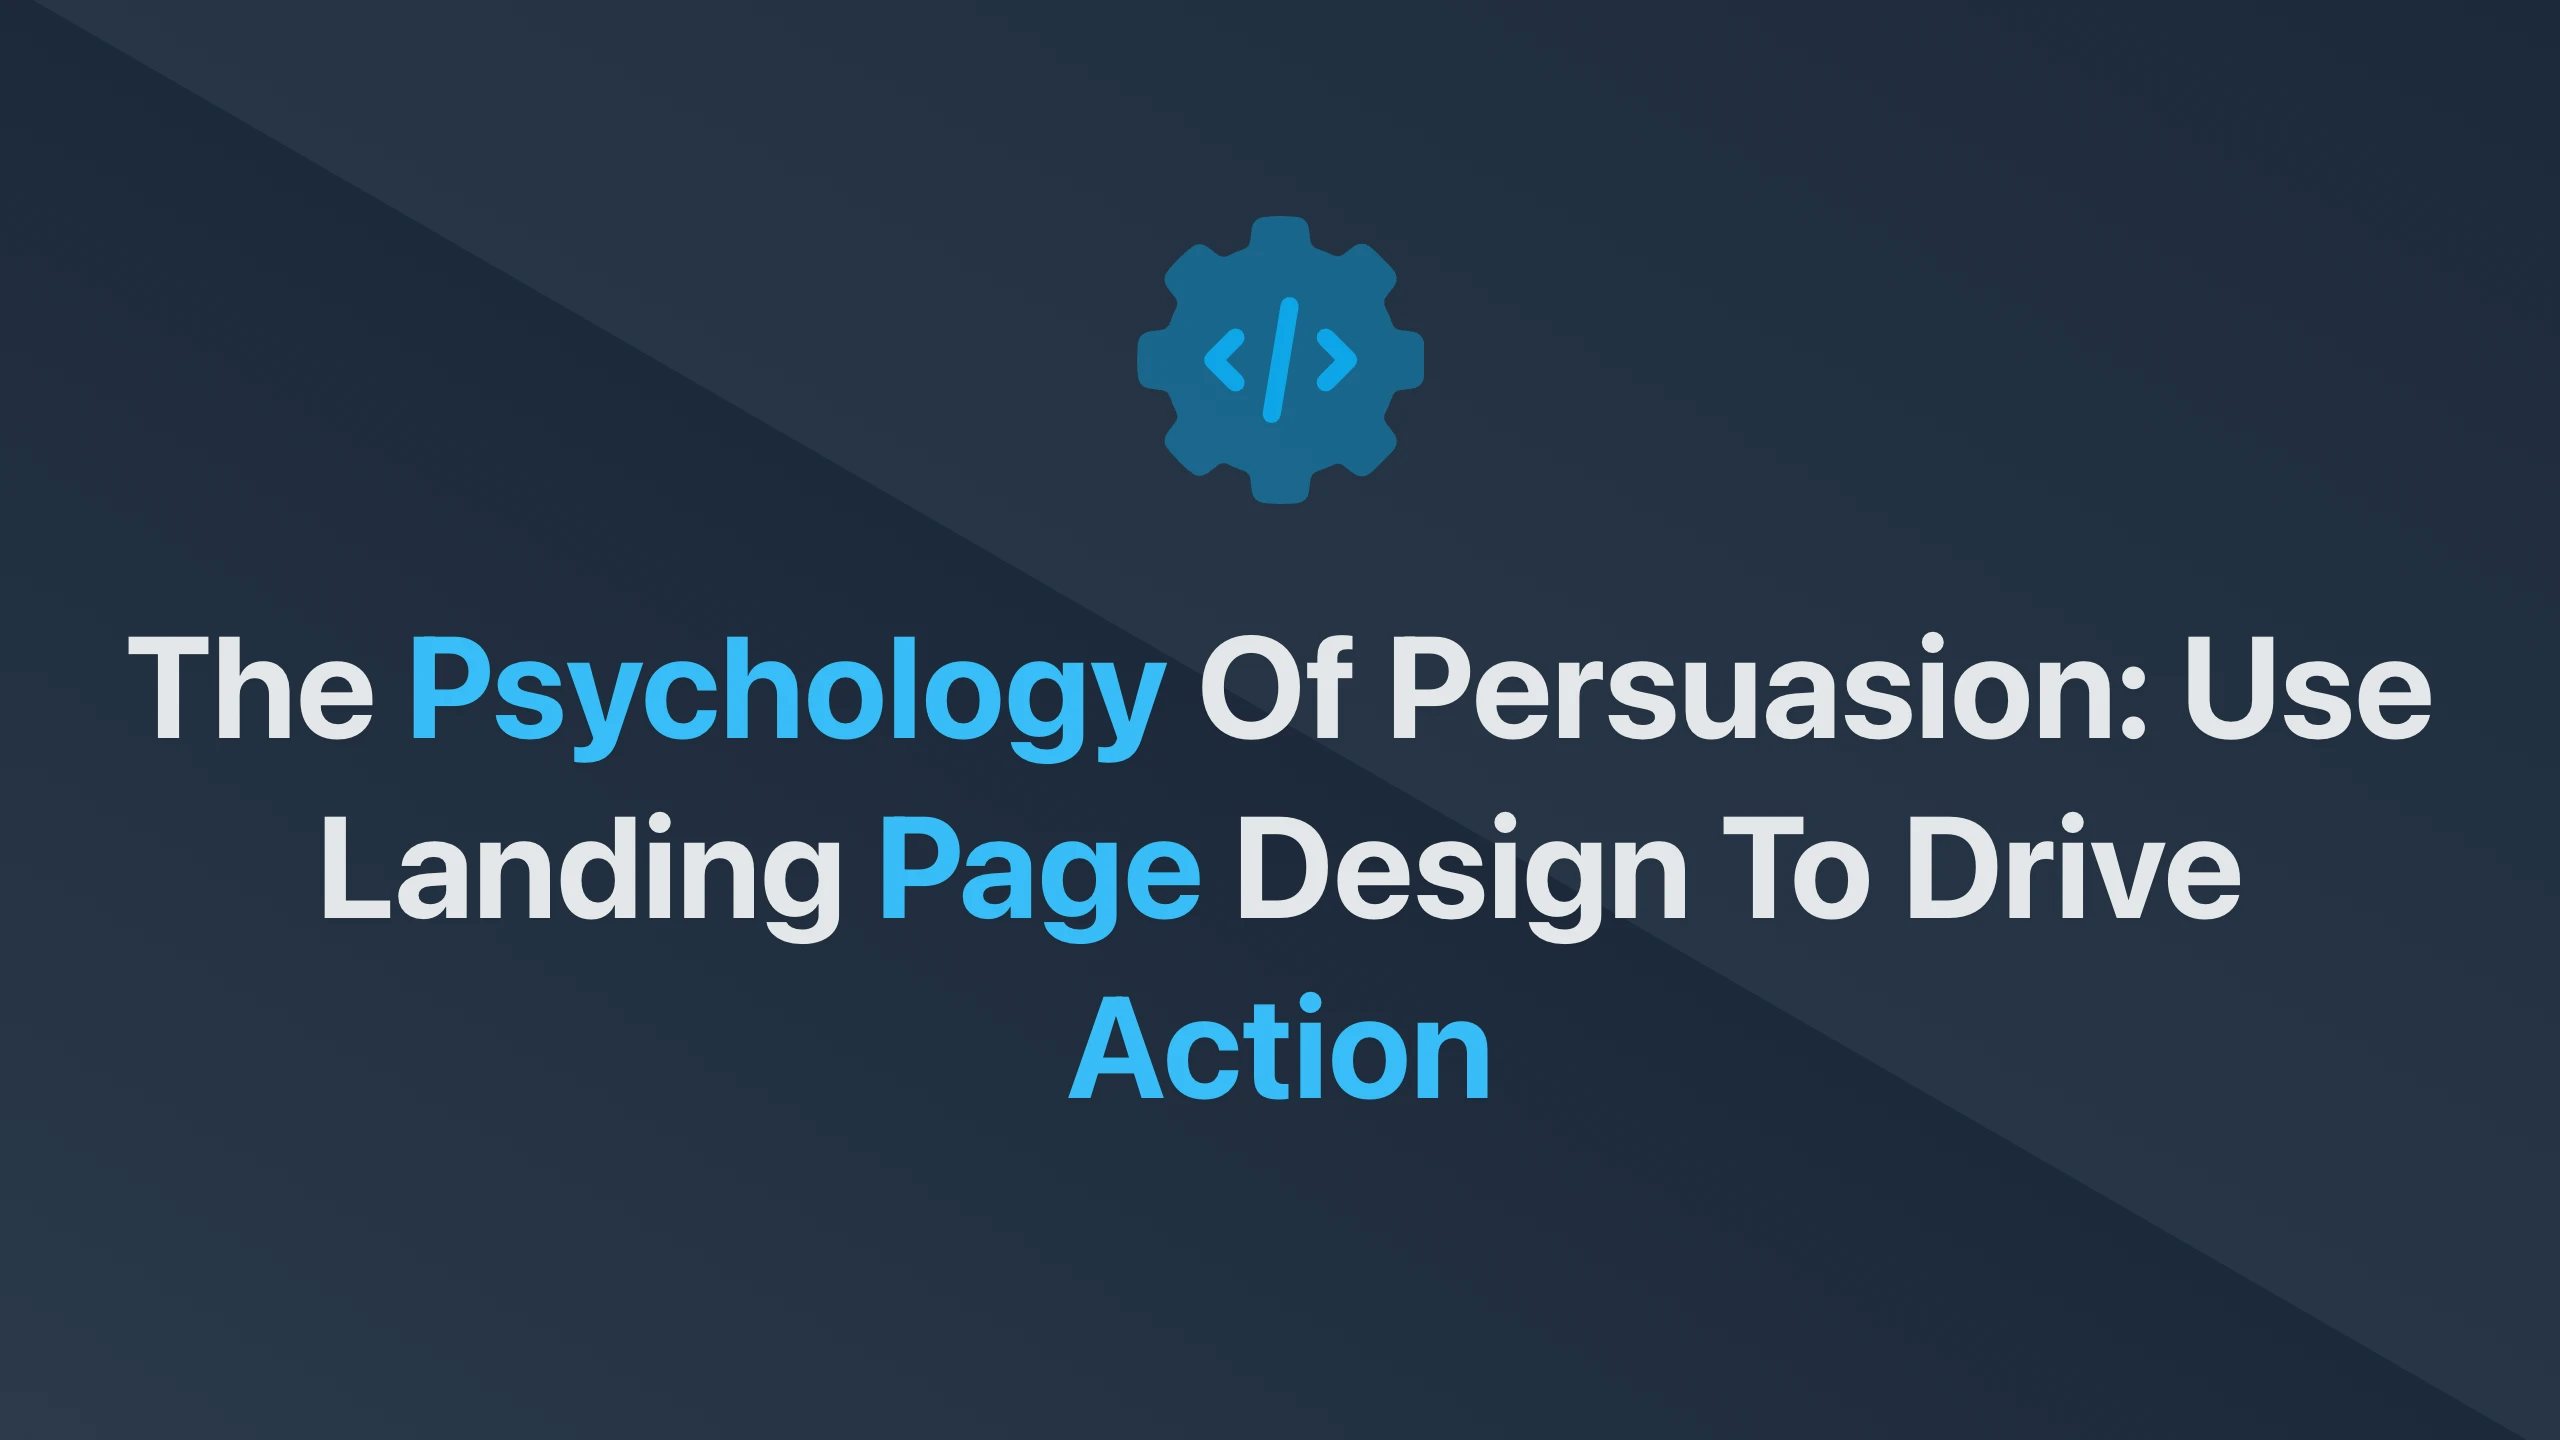 Cover Image for The Psychology of Persuasion: Use Landing Page Design to Drive Action